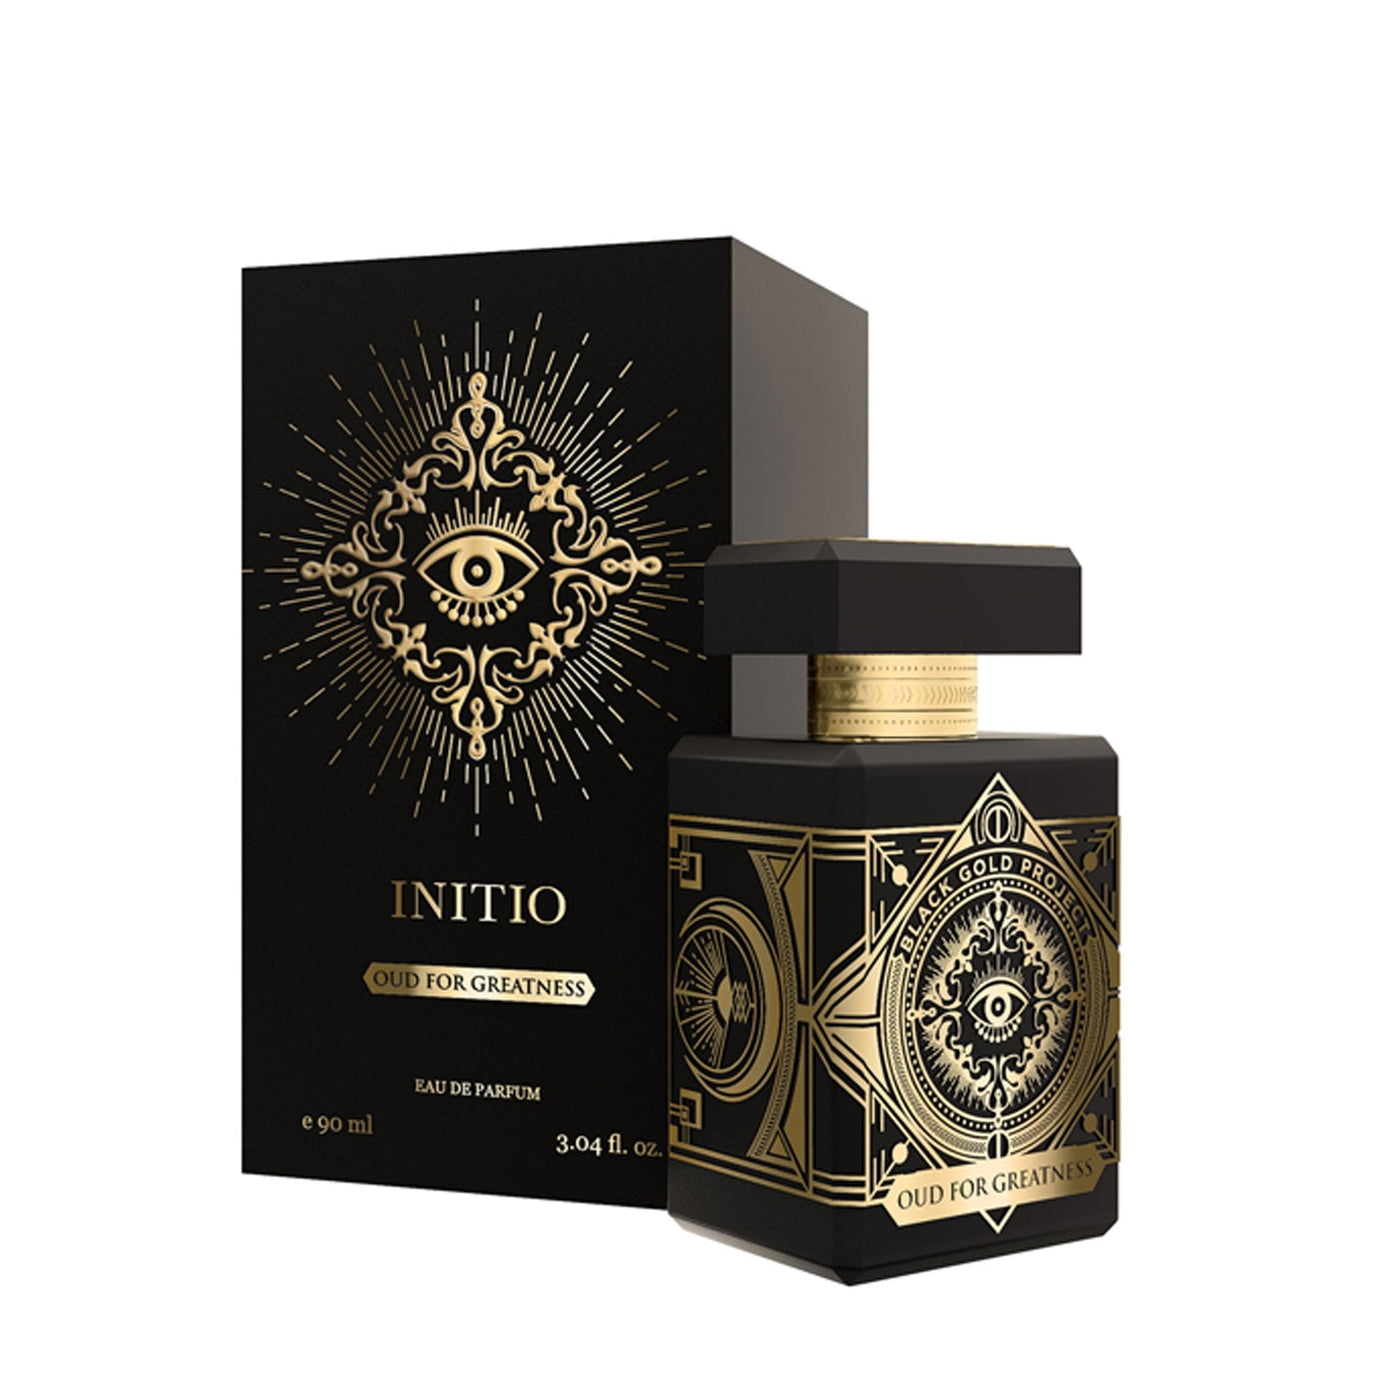 Initio Oud for Greatness 90ml Retail Pack